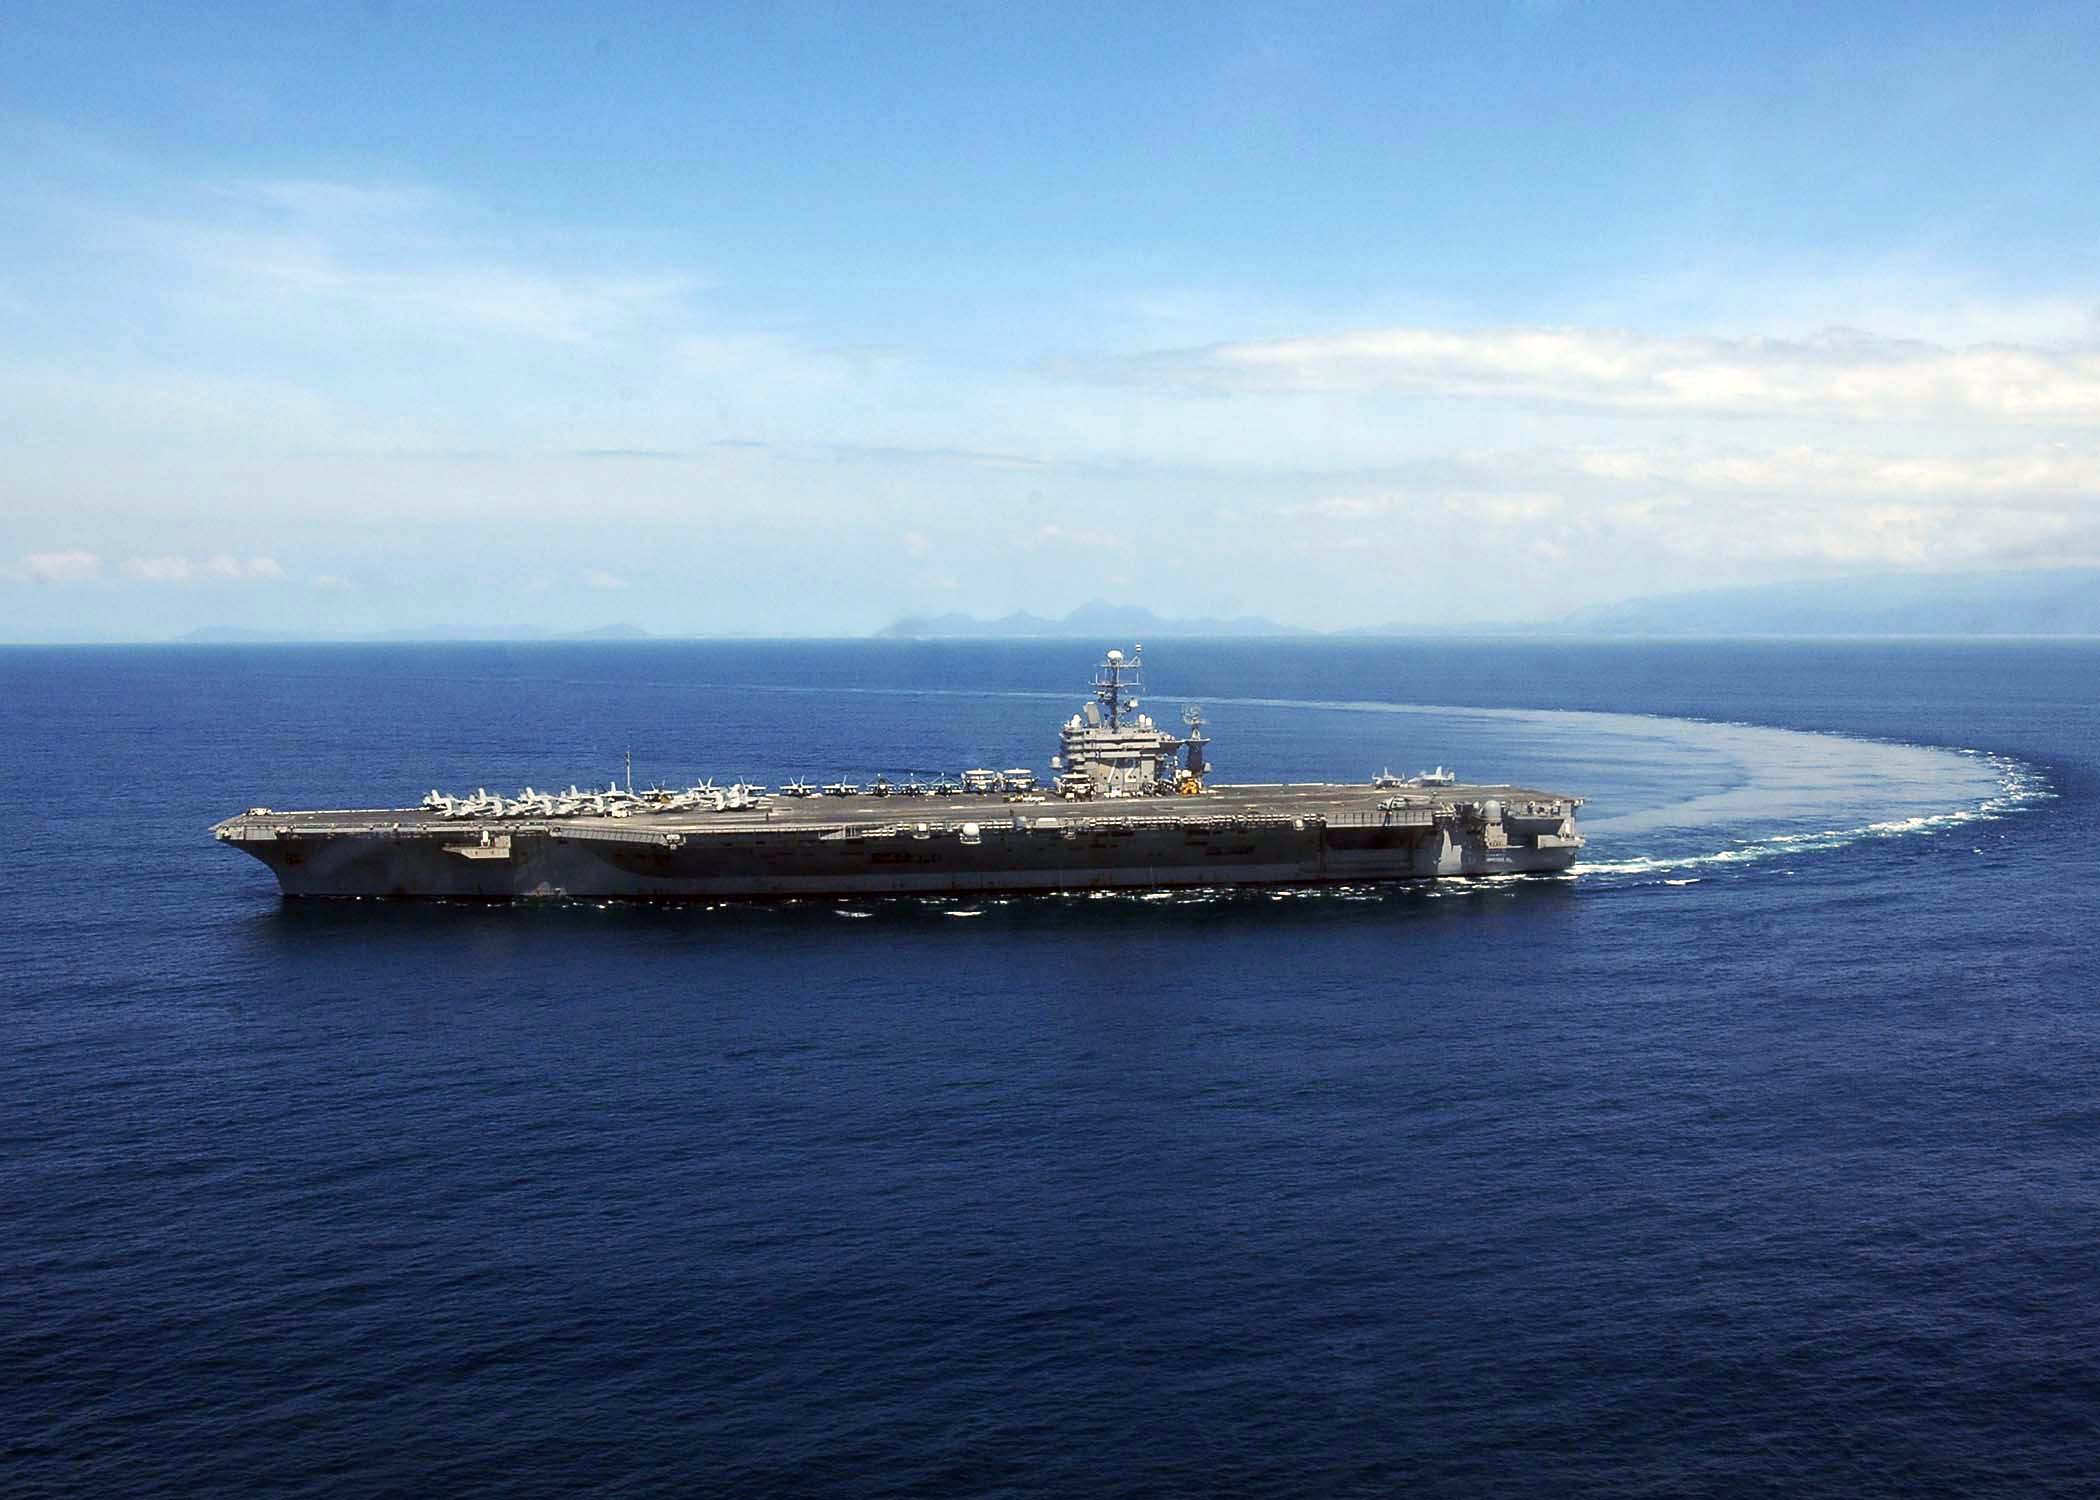 US Navy 050107-N-6074Y-046 The Nimitz-class aircraft carrier USS Abraham Lincoln (CVN 72) makes a turn in the waters of the Indian Ocean just off the coast of Sumatra, Indonesia